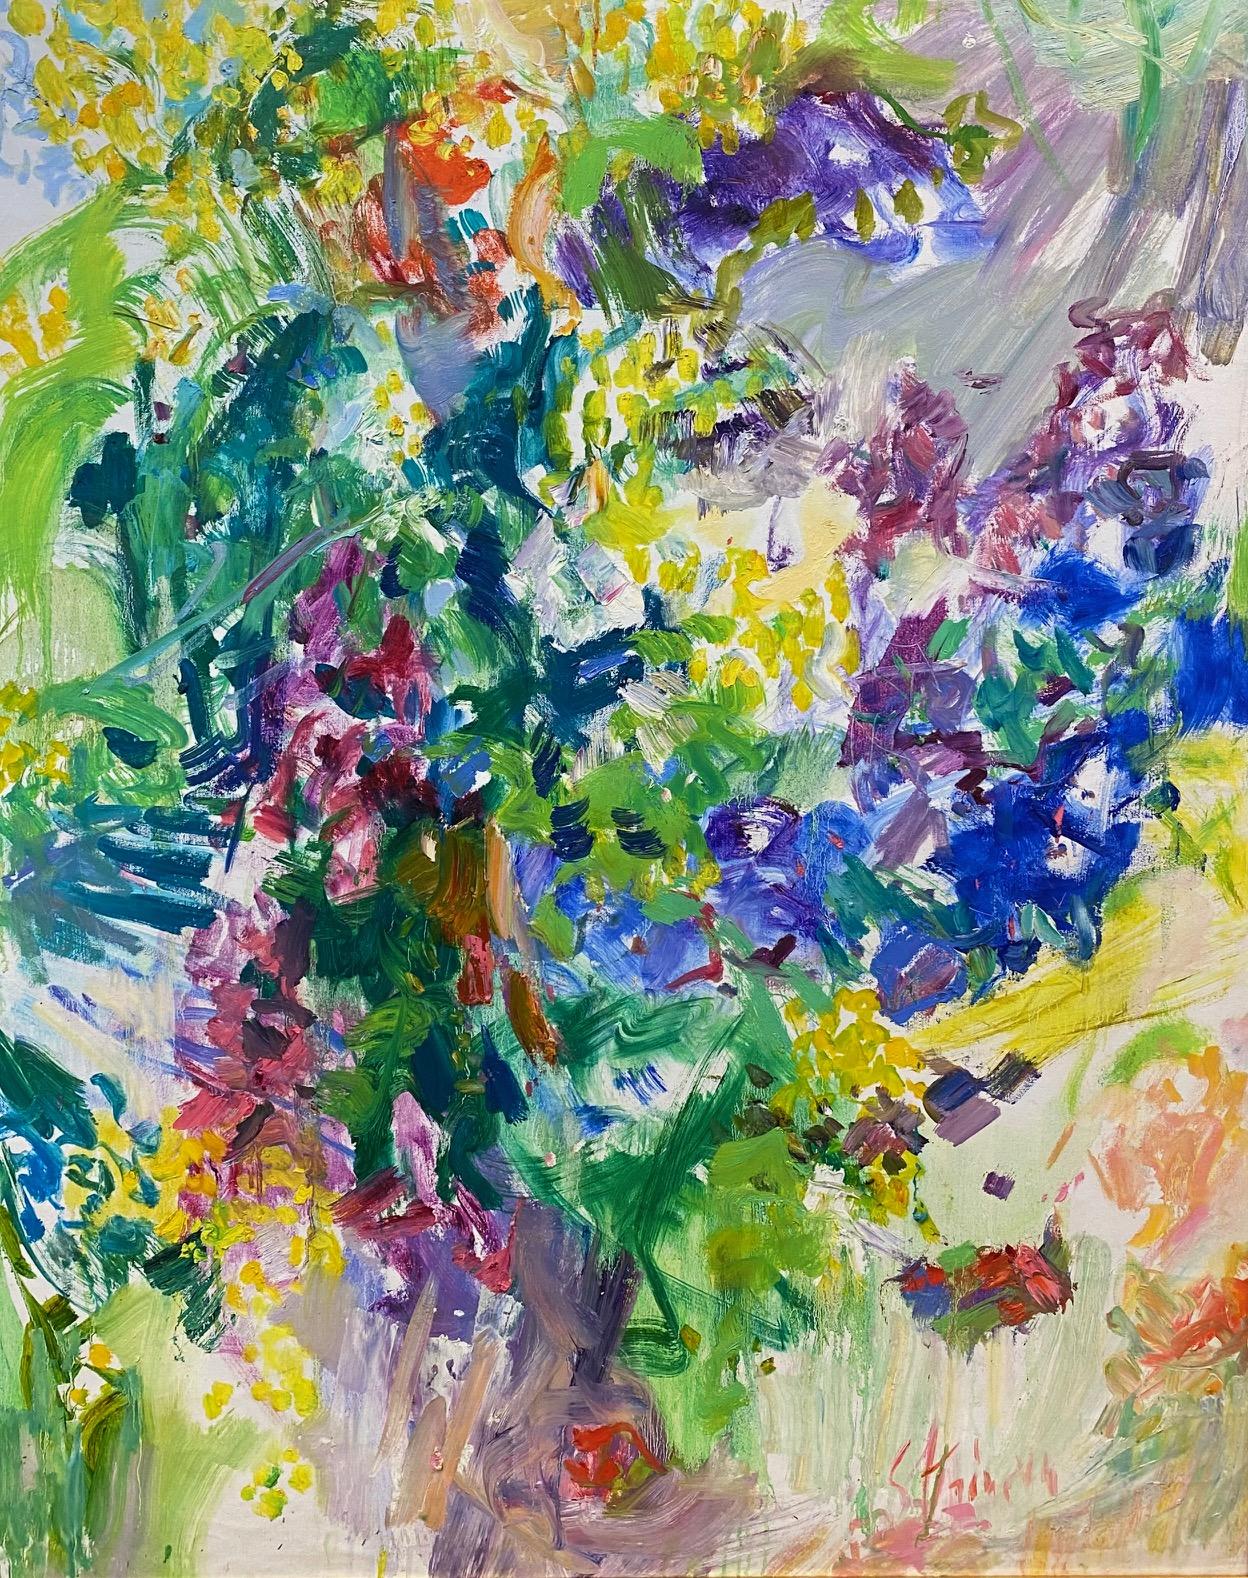 In Search of Harmony, paysage floral impressionniste abstrait original 49x39 - Painting de Sonia Grineva